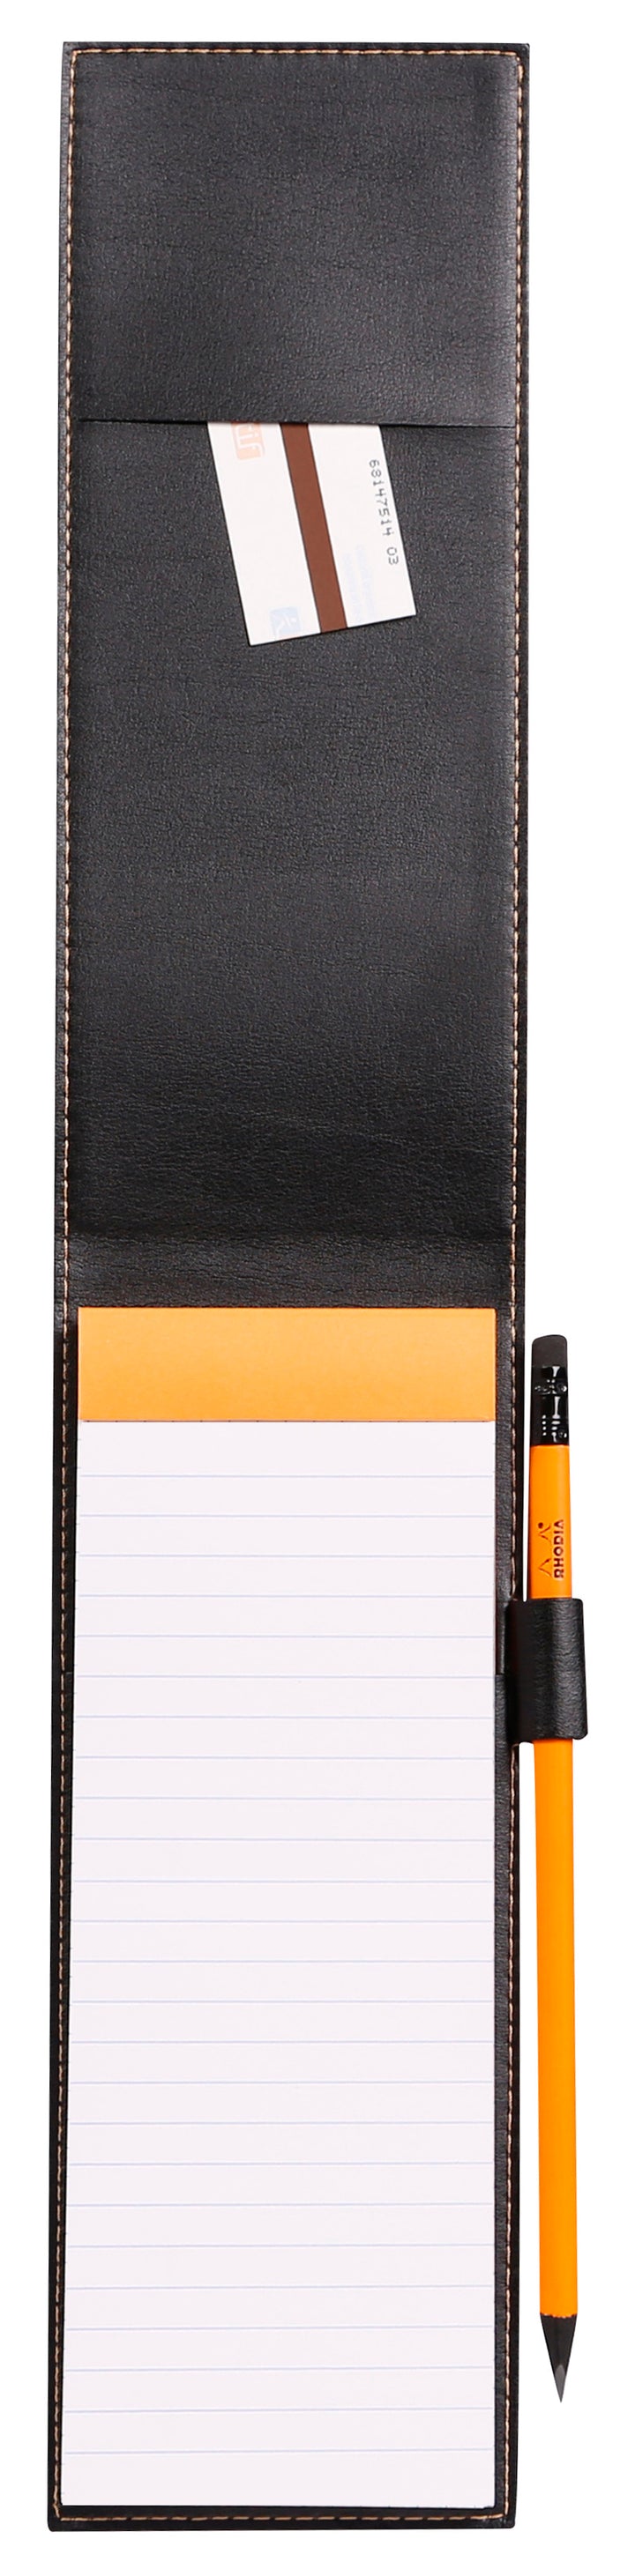 Rhodia Boutique Orange Stapled Line Ruled Notepad with Leatherette Cover - 220 mm x 84 mm